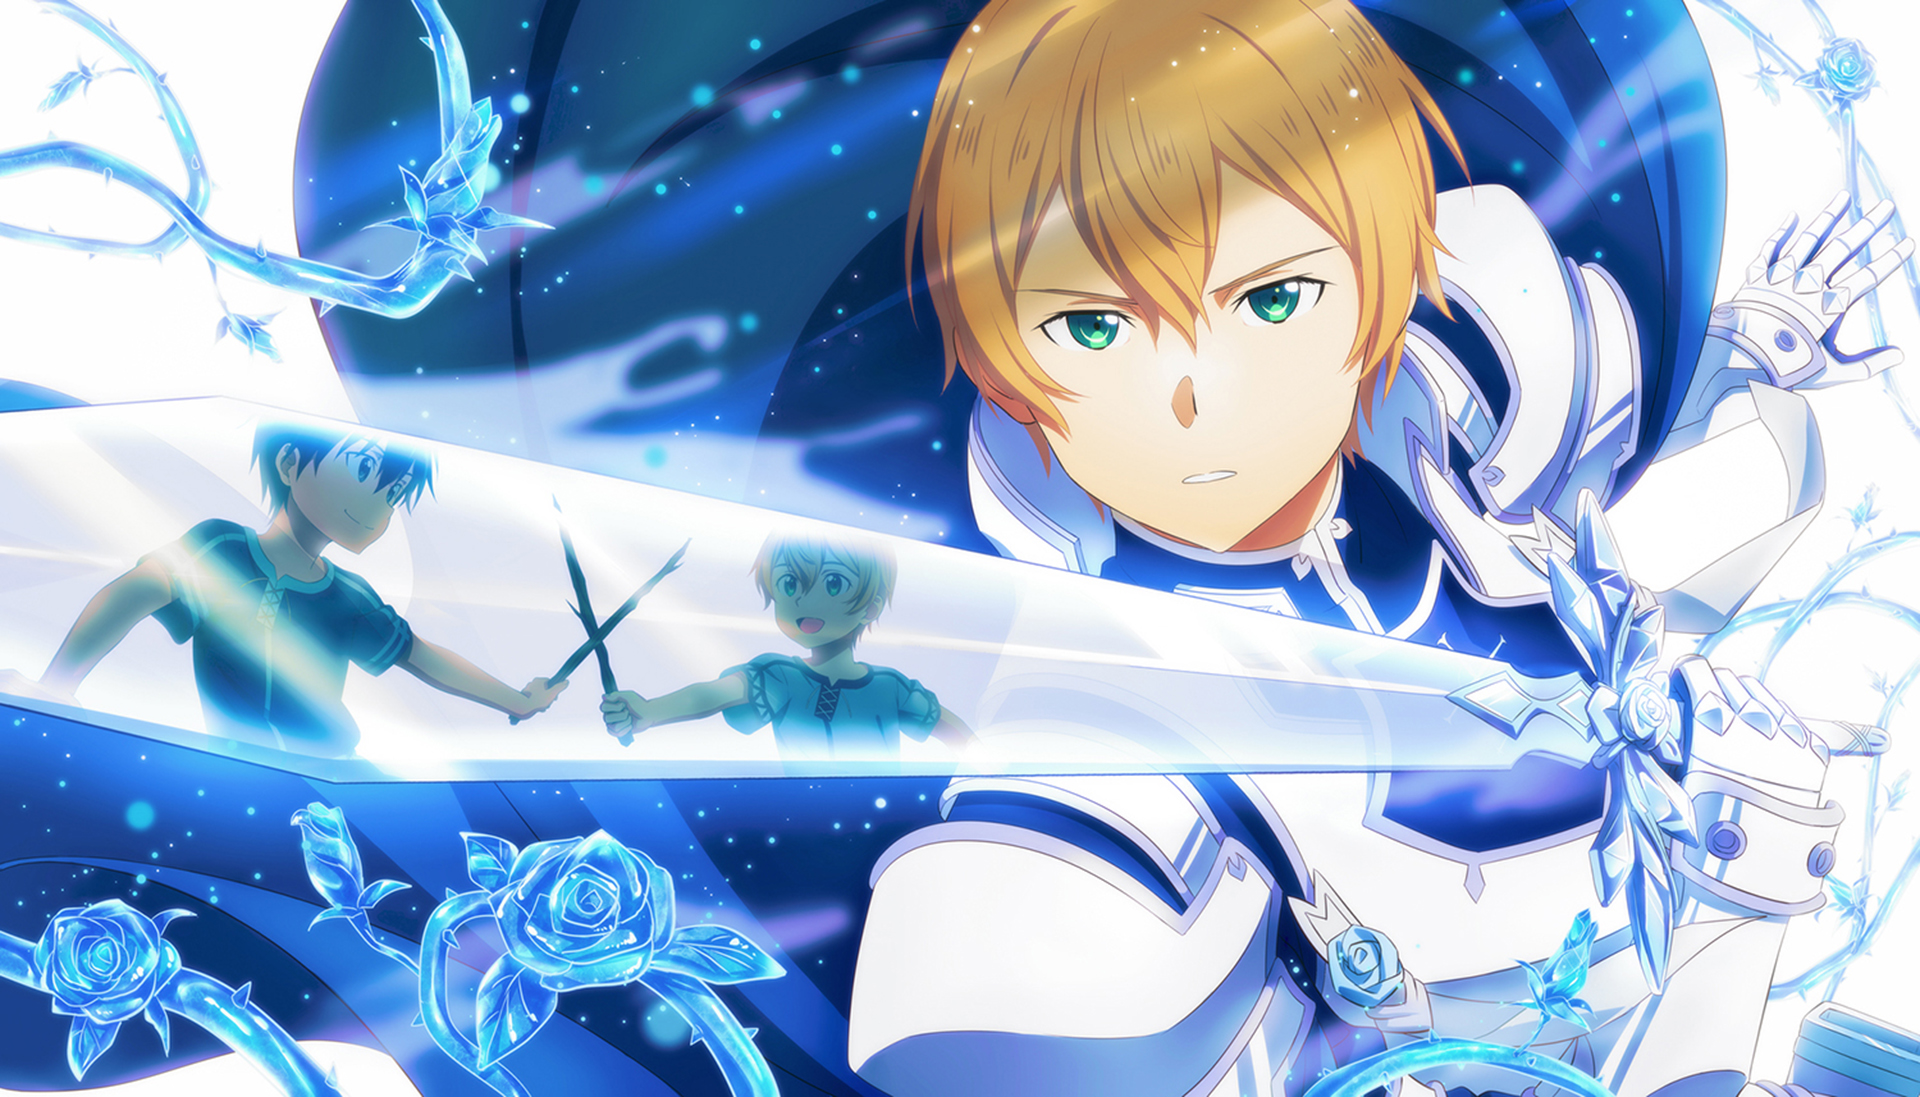 Eugeo by FCC